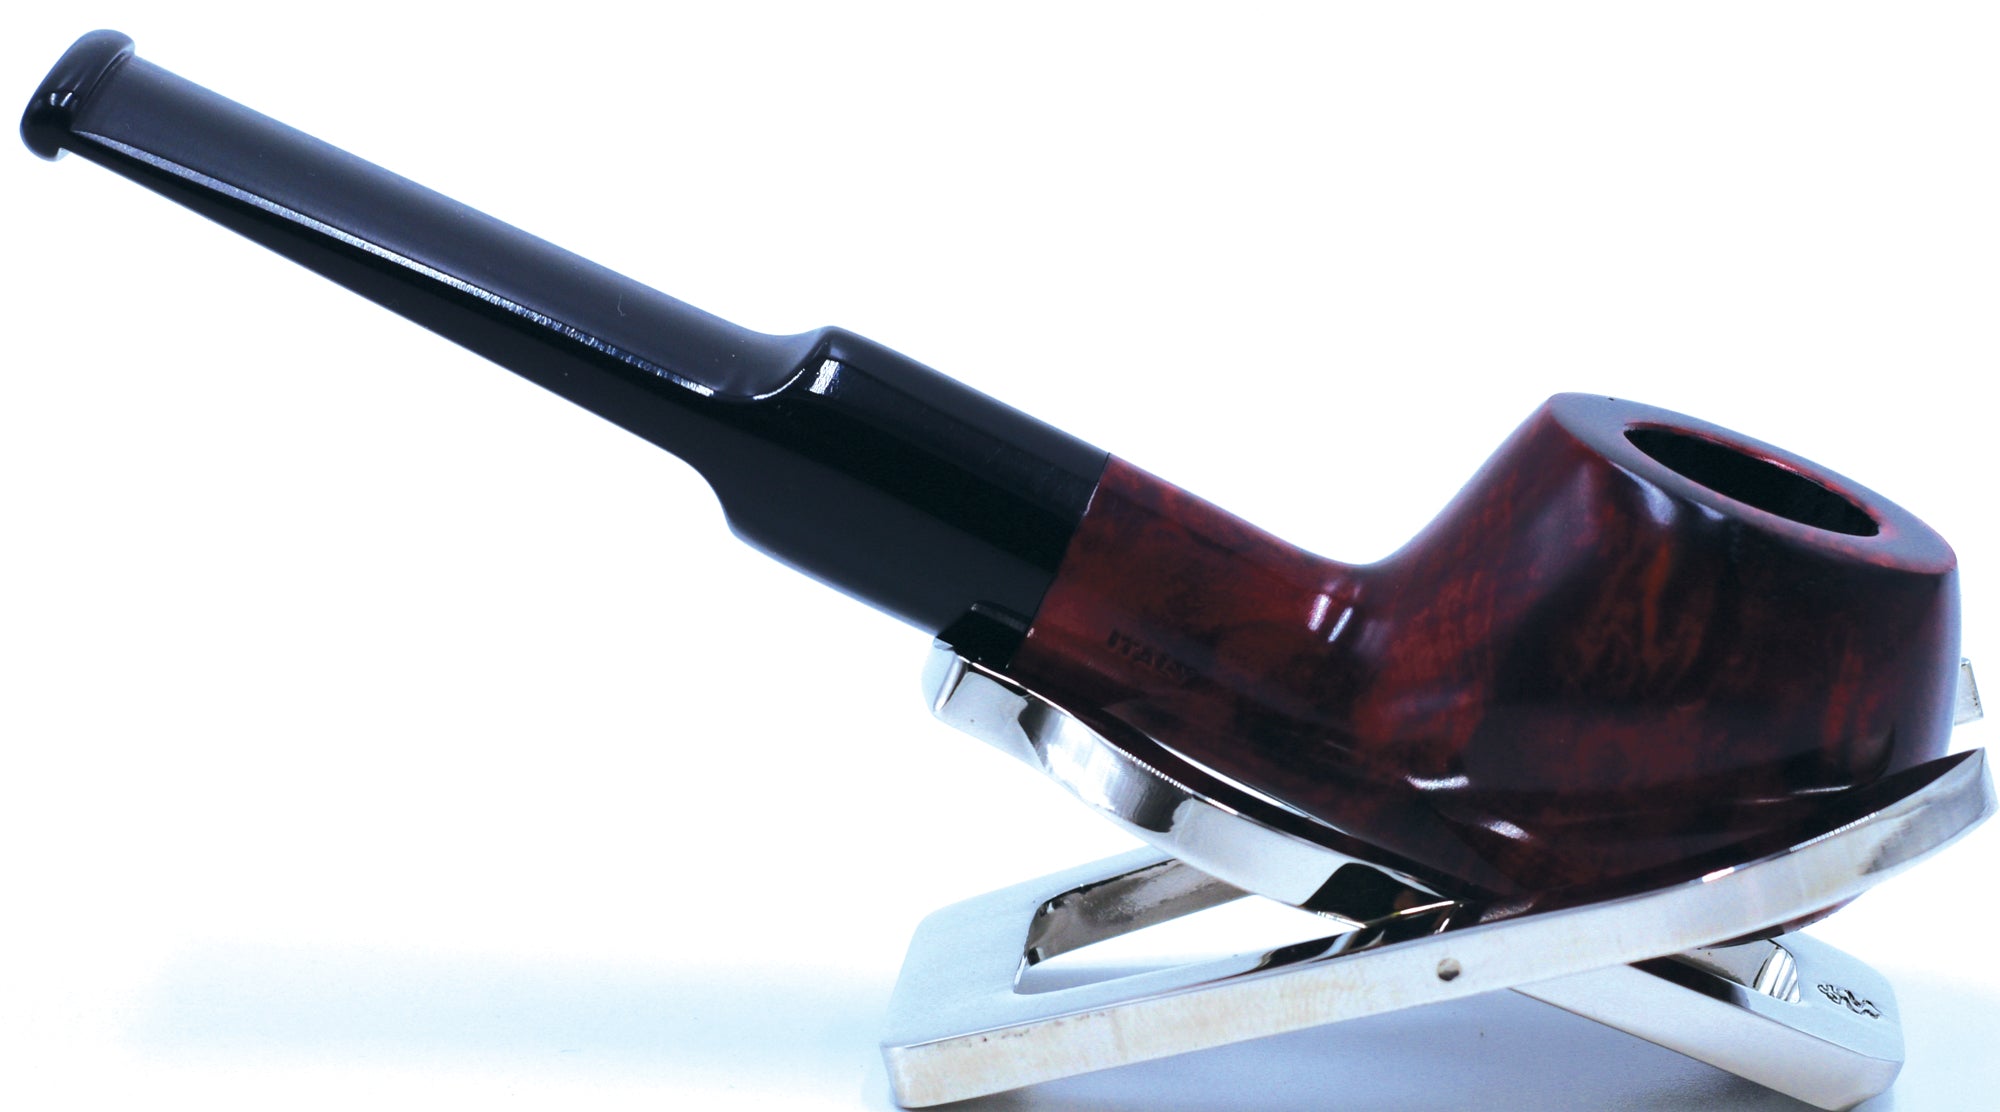 LEGENDEX® SCALADI* 9 MM Filtered Briar Smoking Pipe Made In Italy 01-08-134